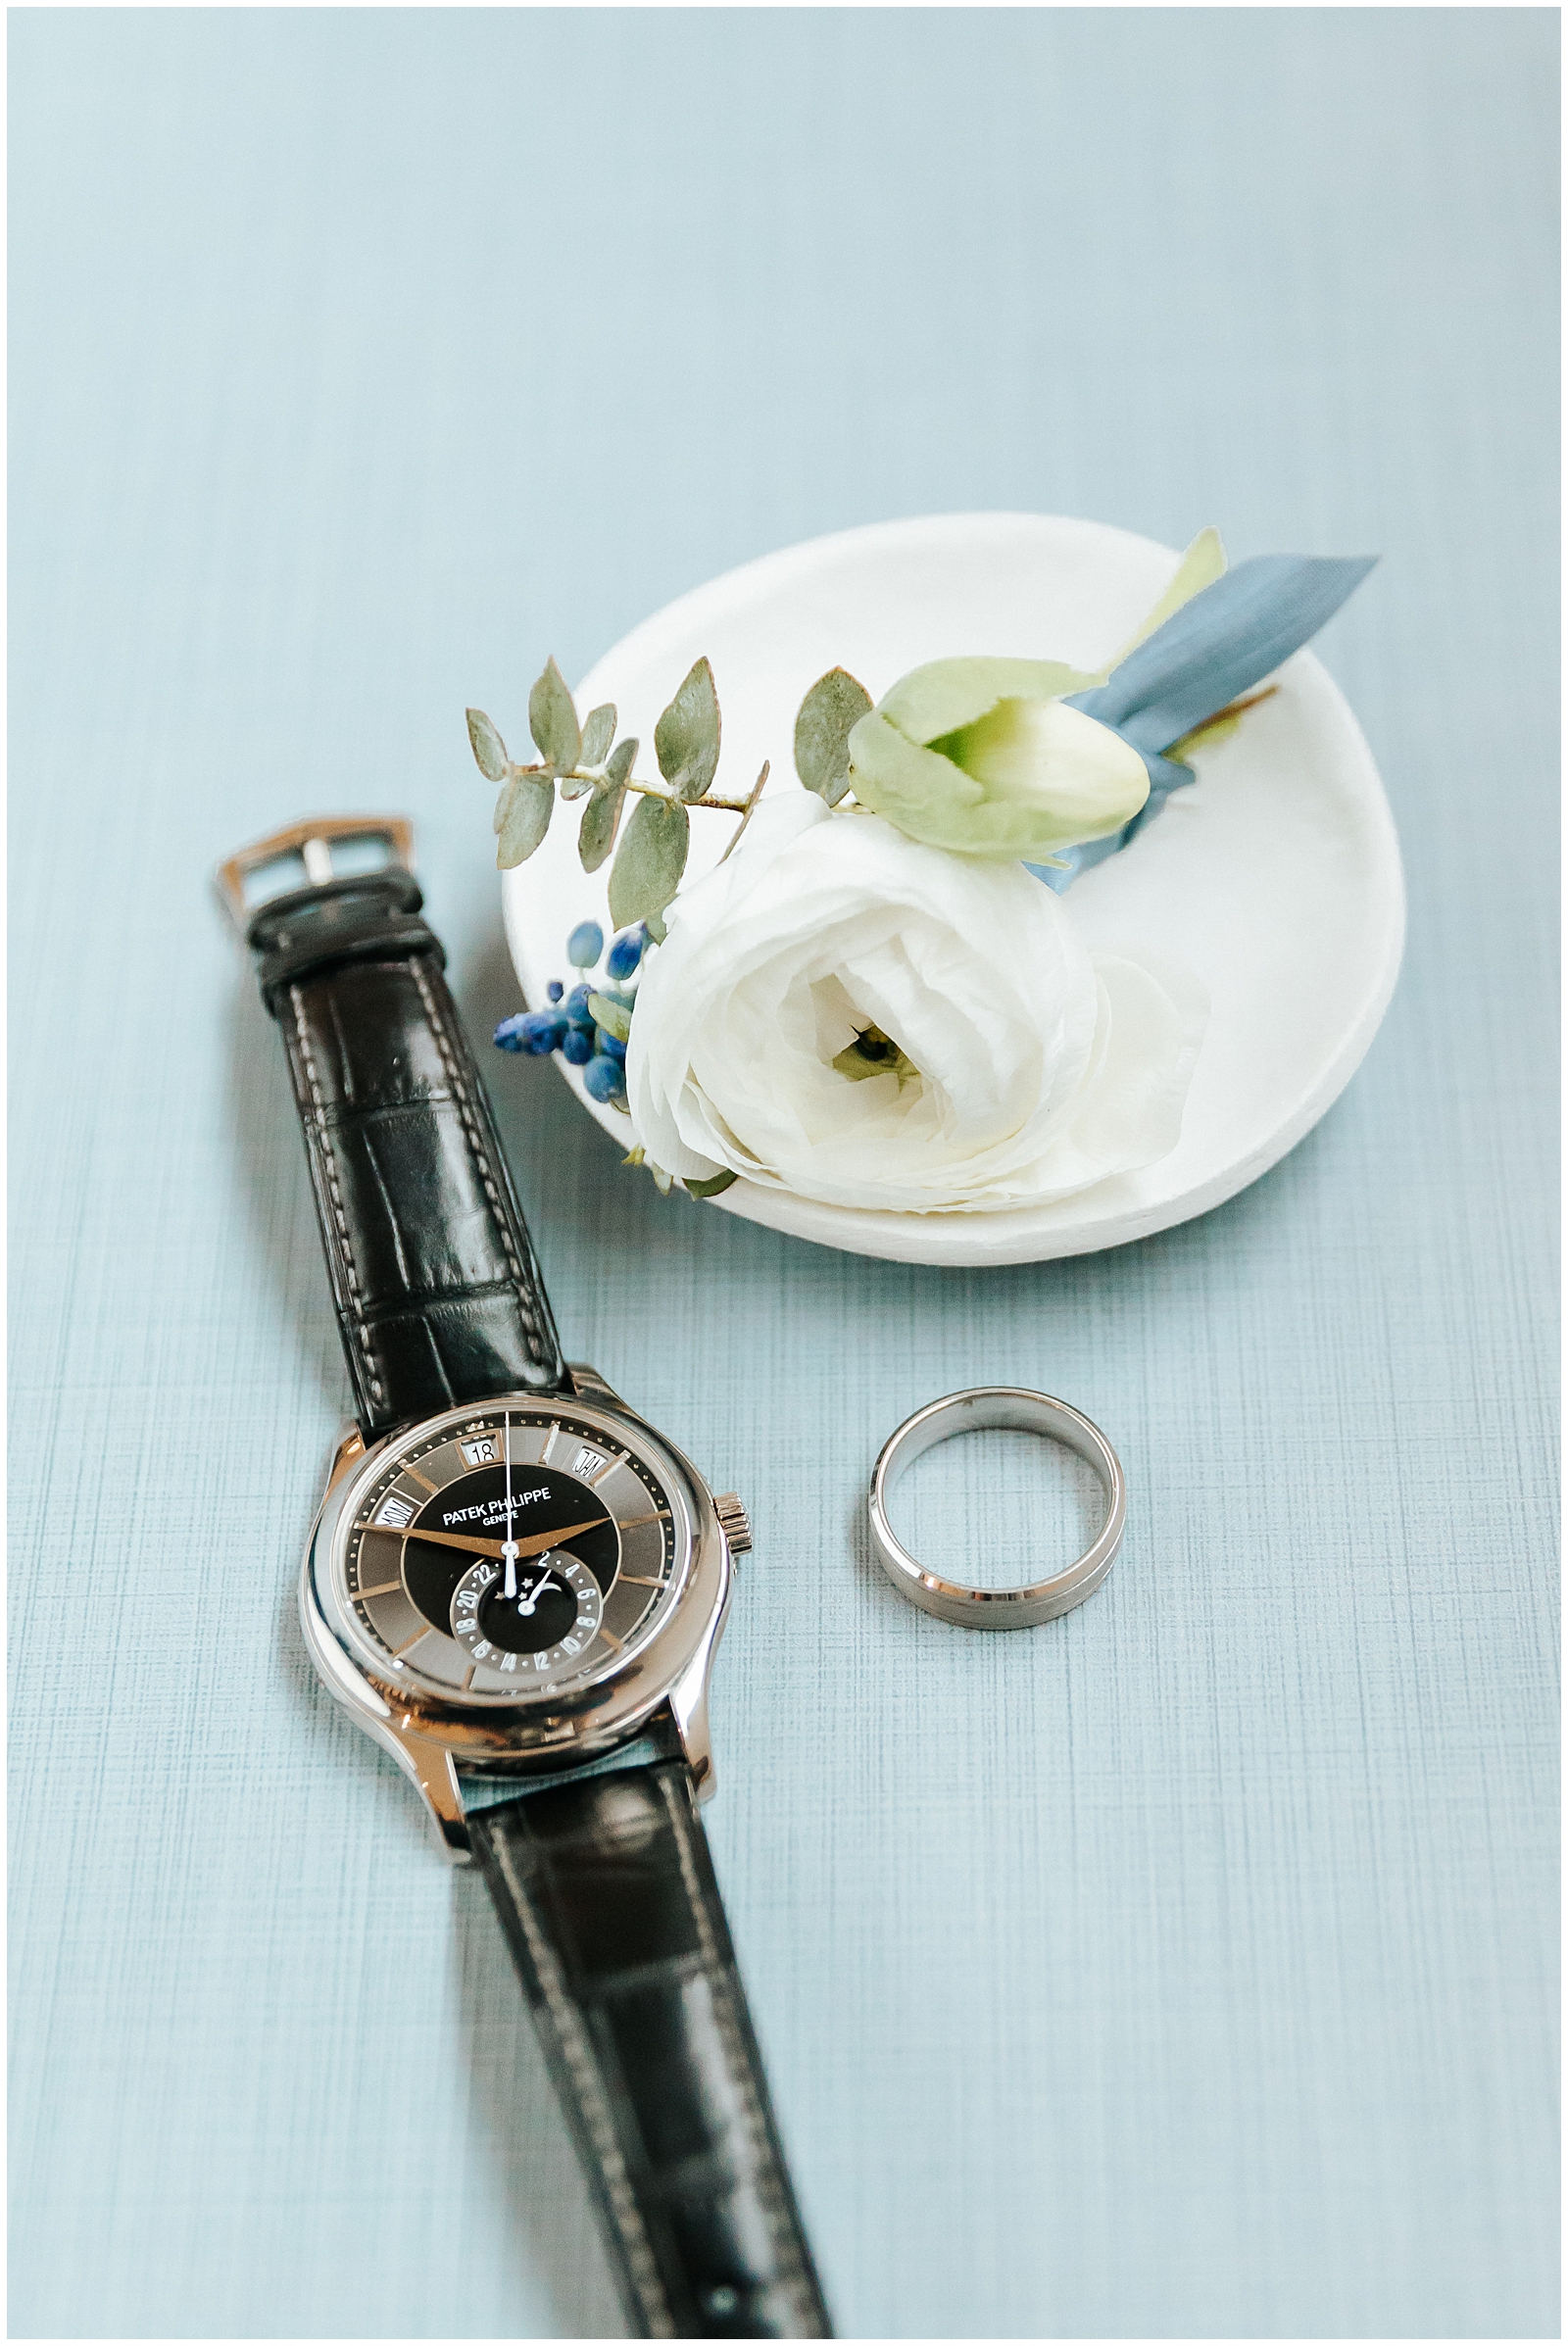 The Groom's Details - Patek Philippe Watch, wedding band, and white Boutonniere 